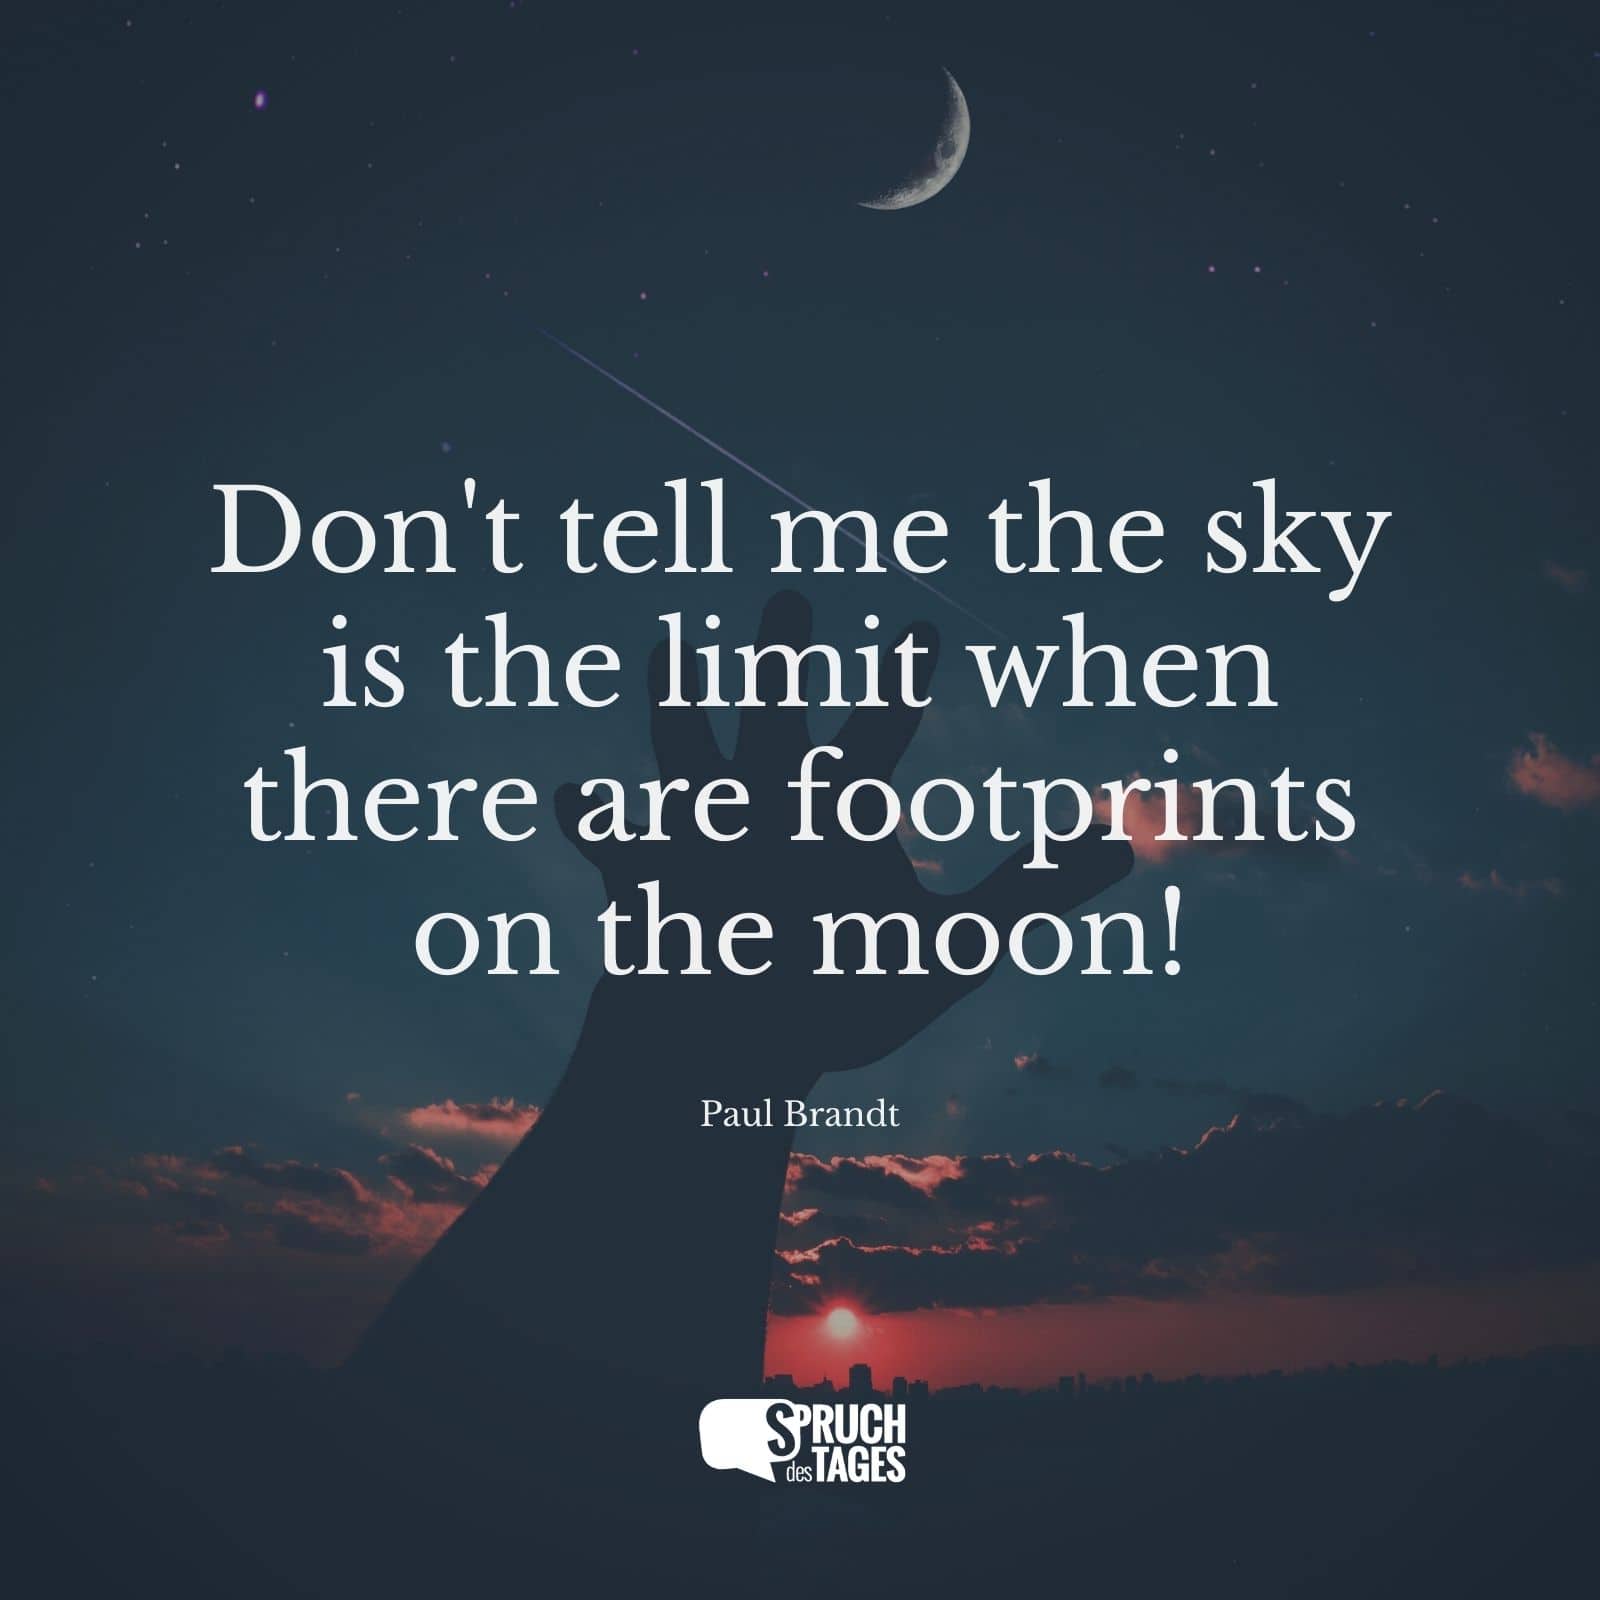 Don't tell me the sky is the limit when there are footprints on the moon!